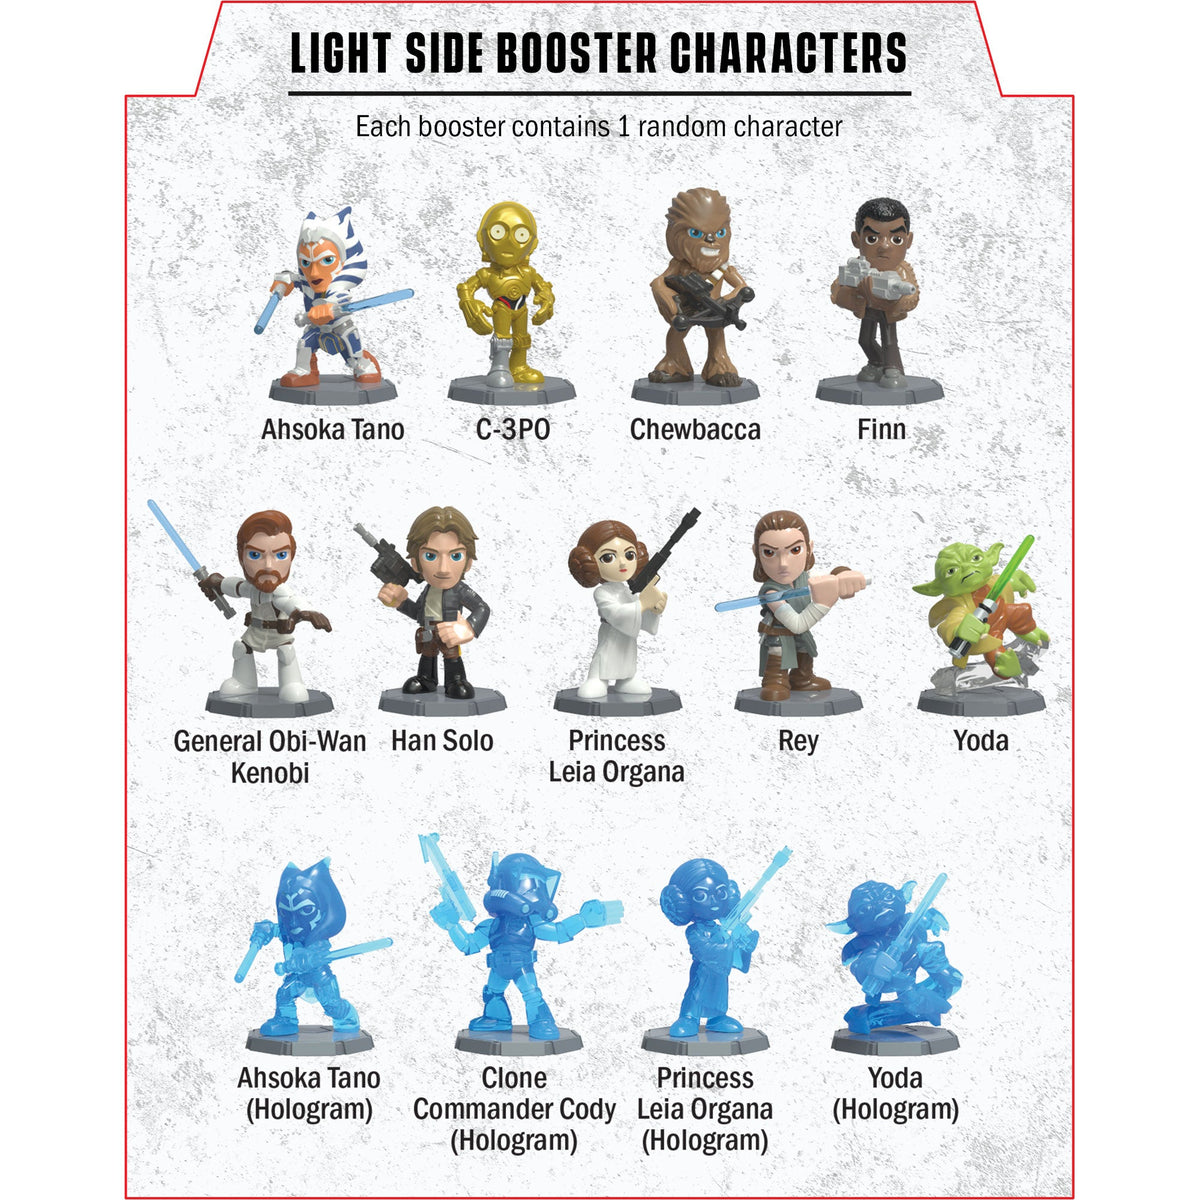 Star Wars Rivals - Light Side Character Booster Pack (Series 1)